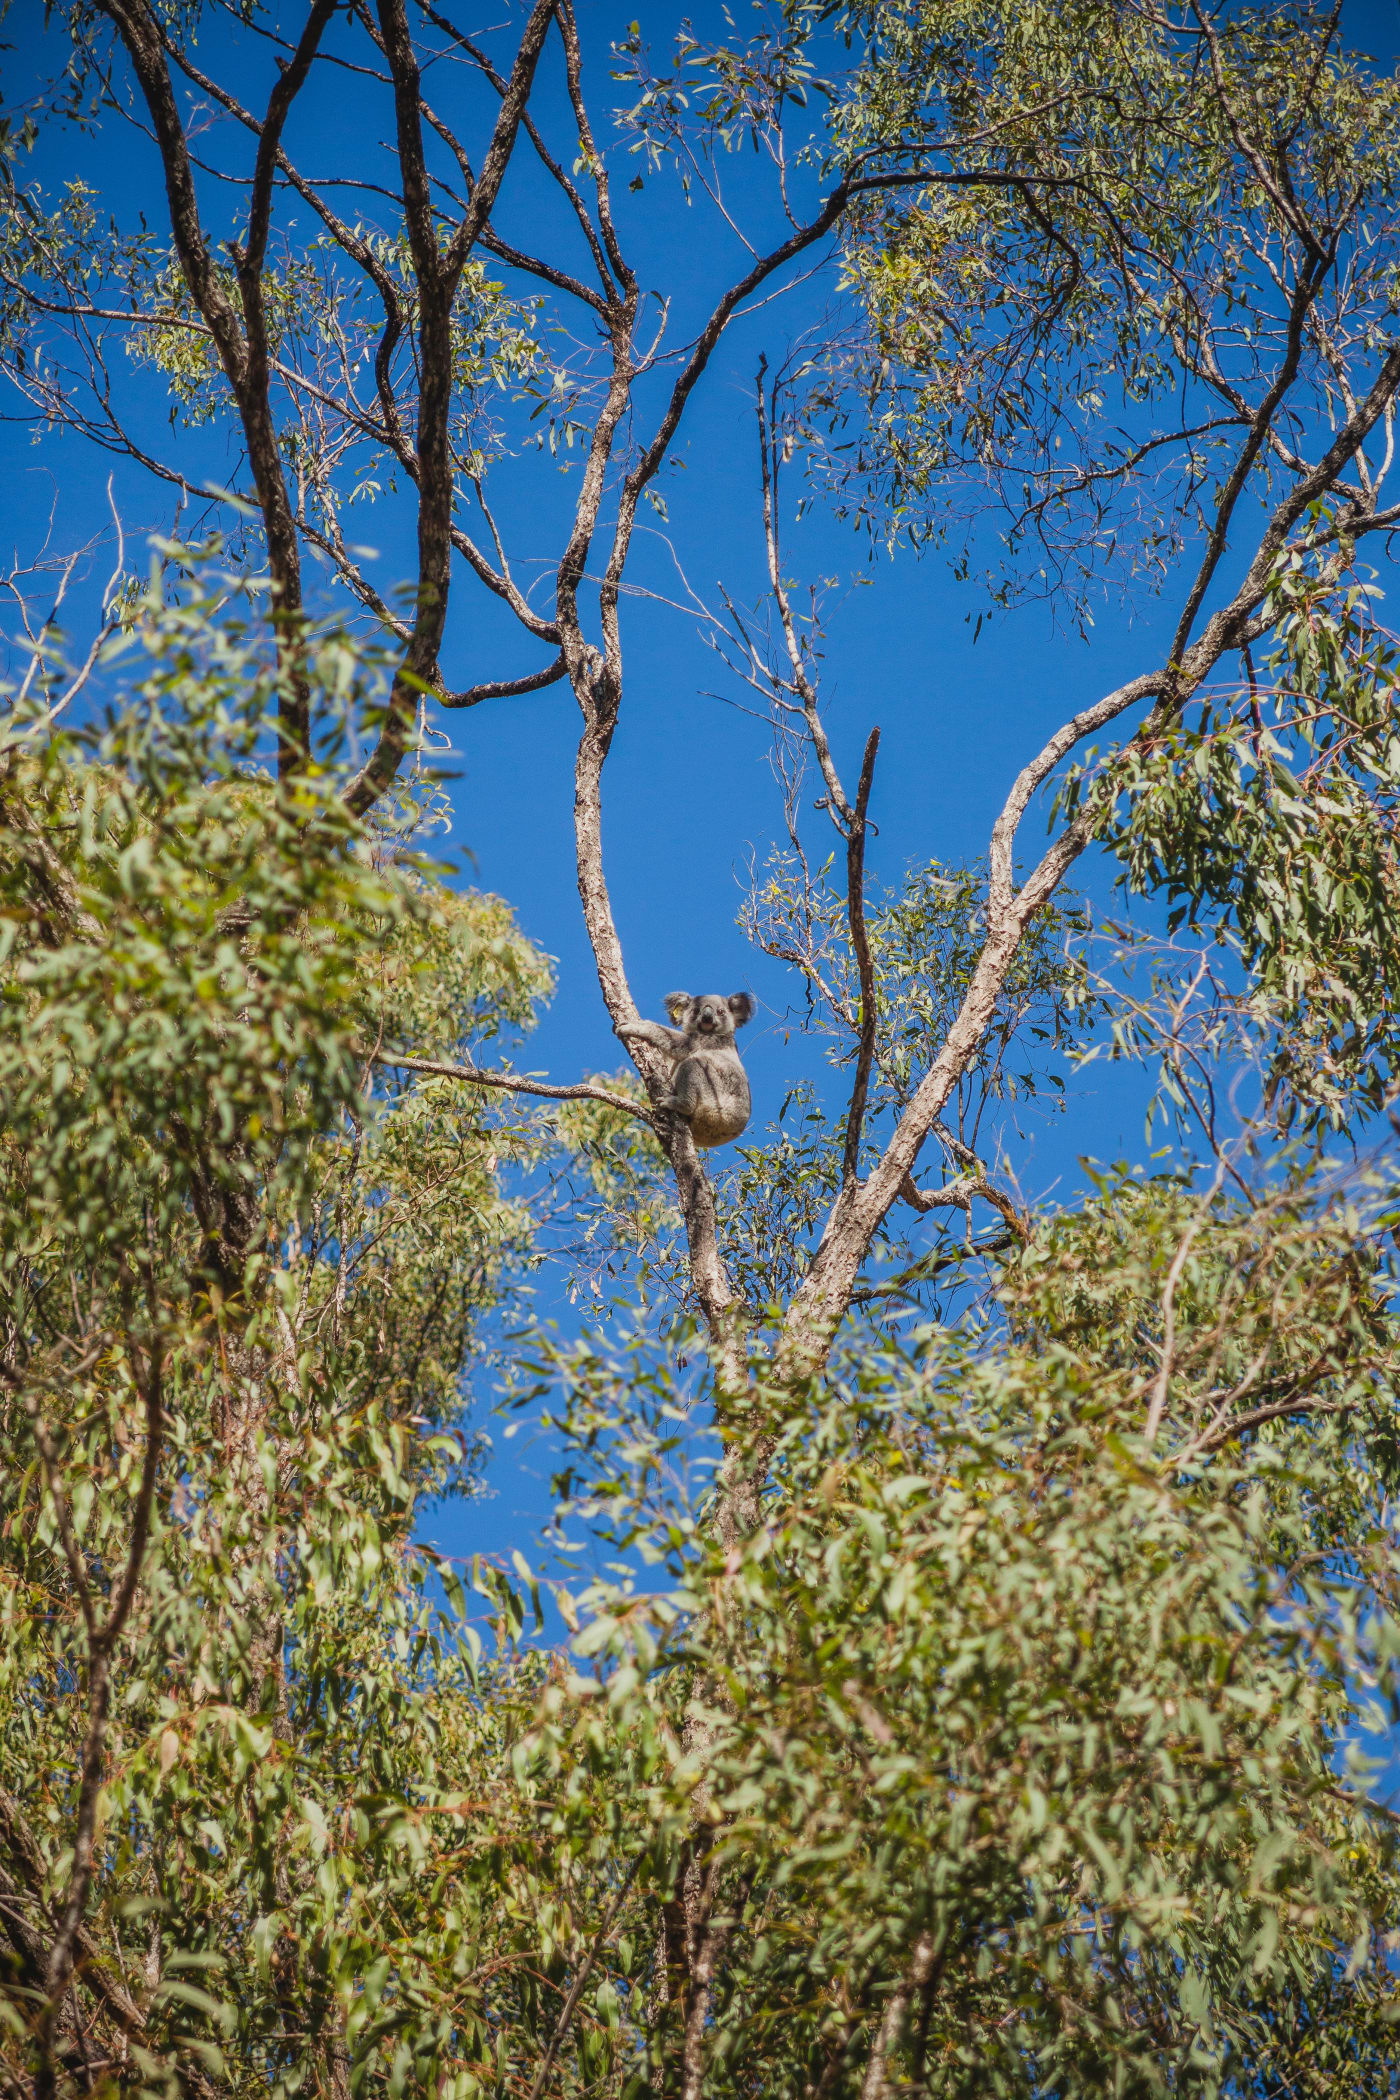 Maryanne the koala looking down from high up a tree after release back to the wild